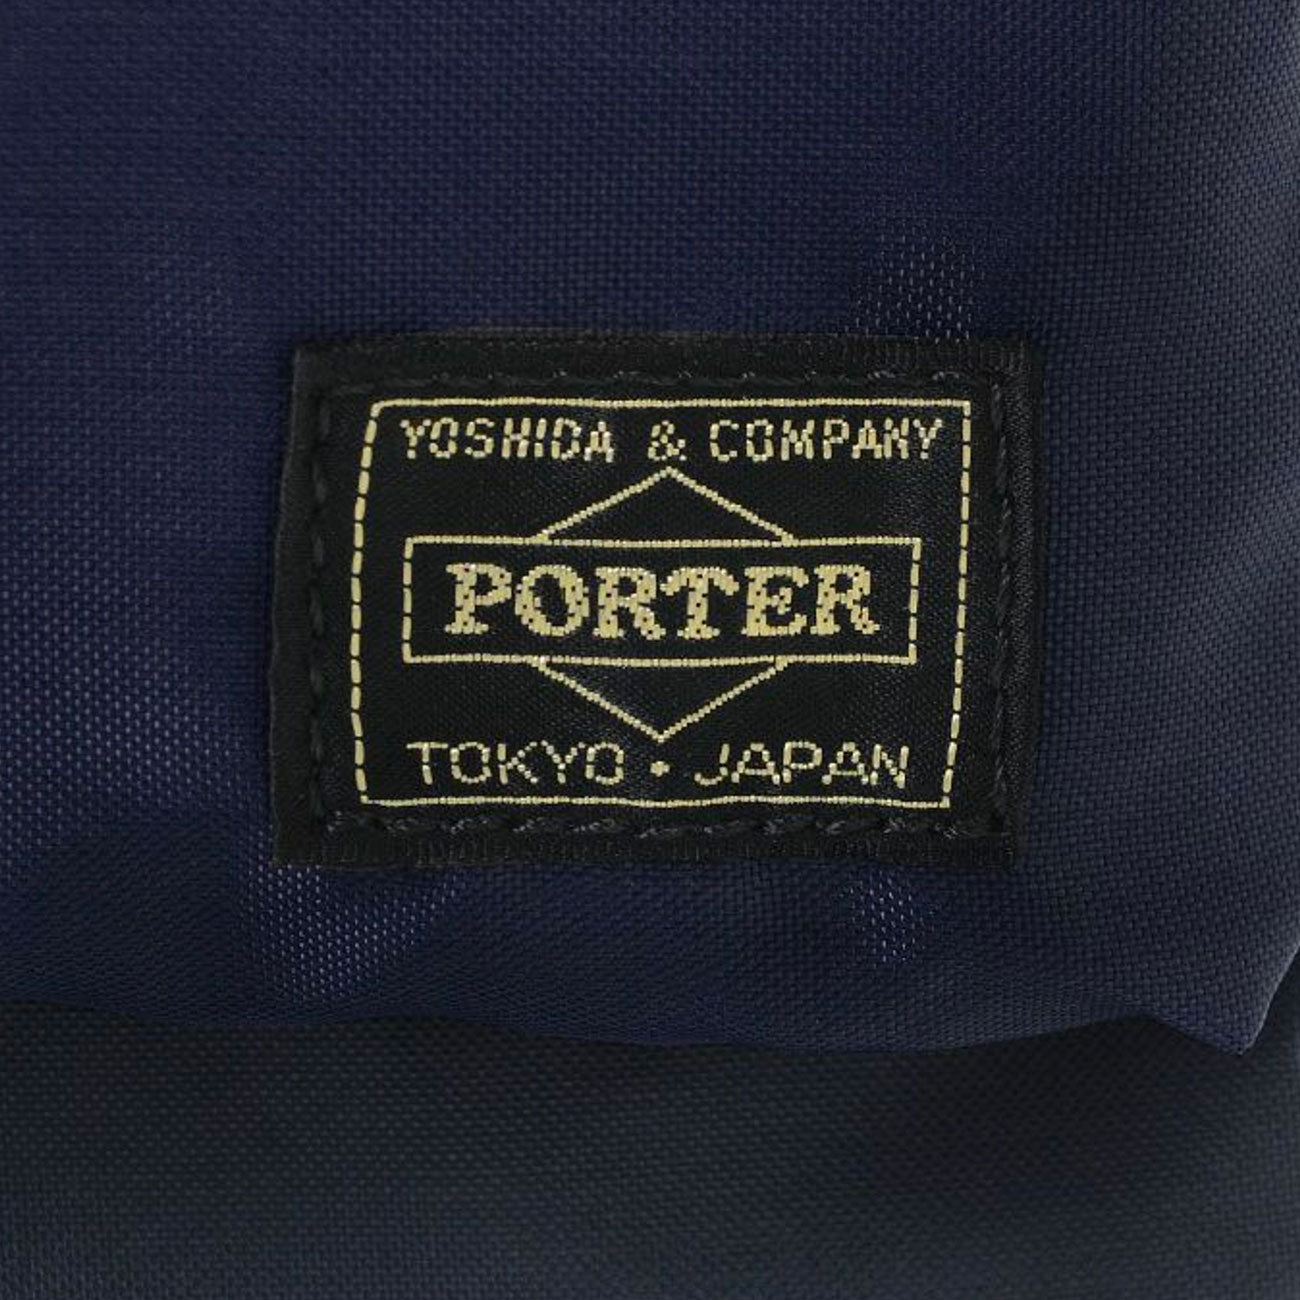 Porter-Yoshida & Co. Force Shoulder Pouch in Navy | End Clothing